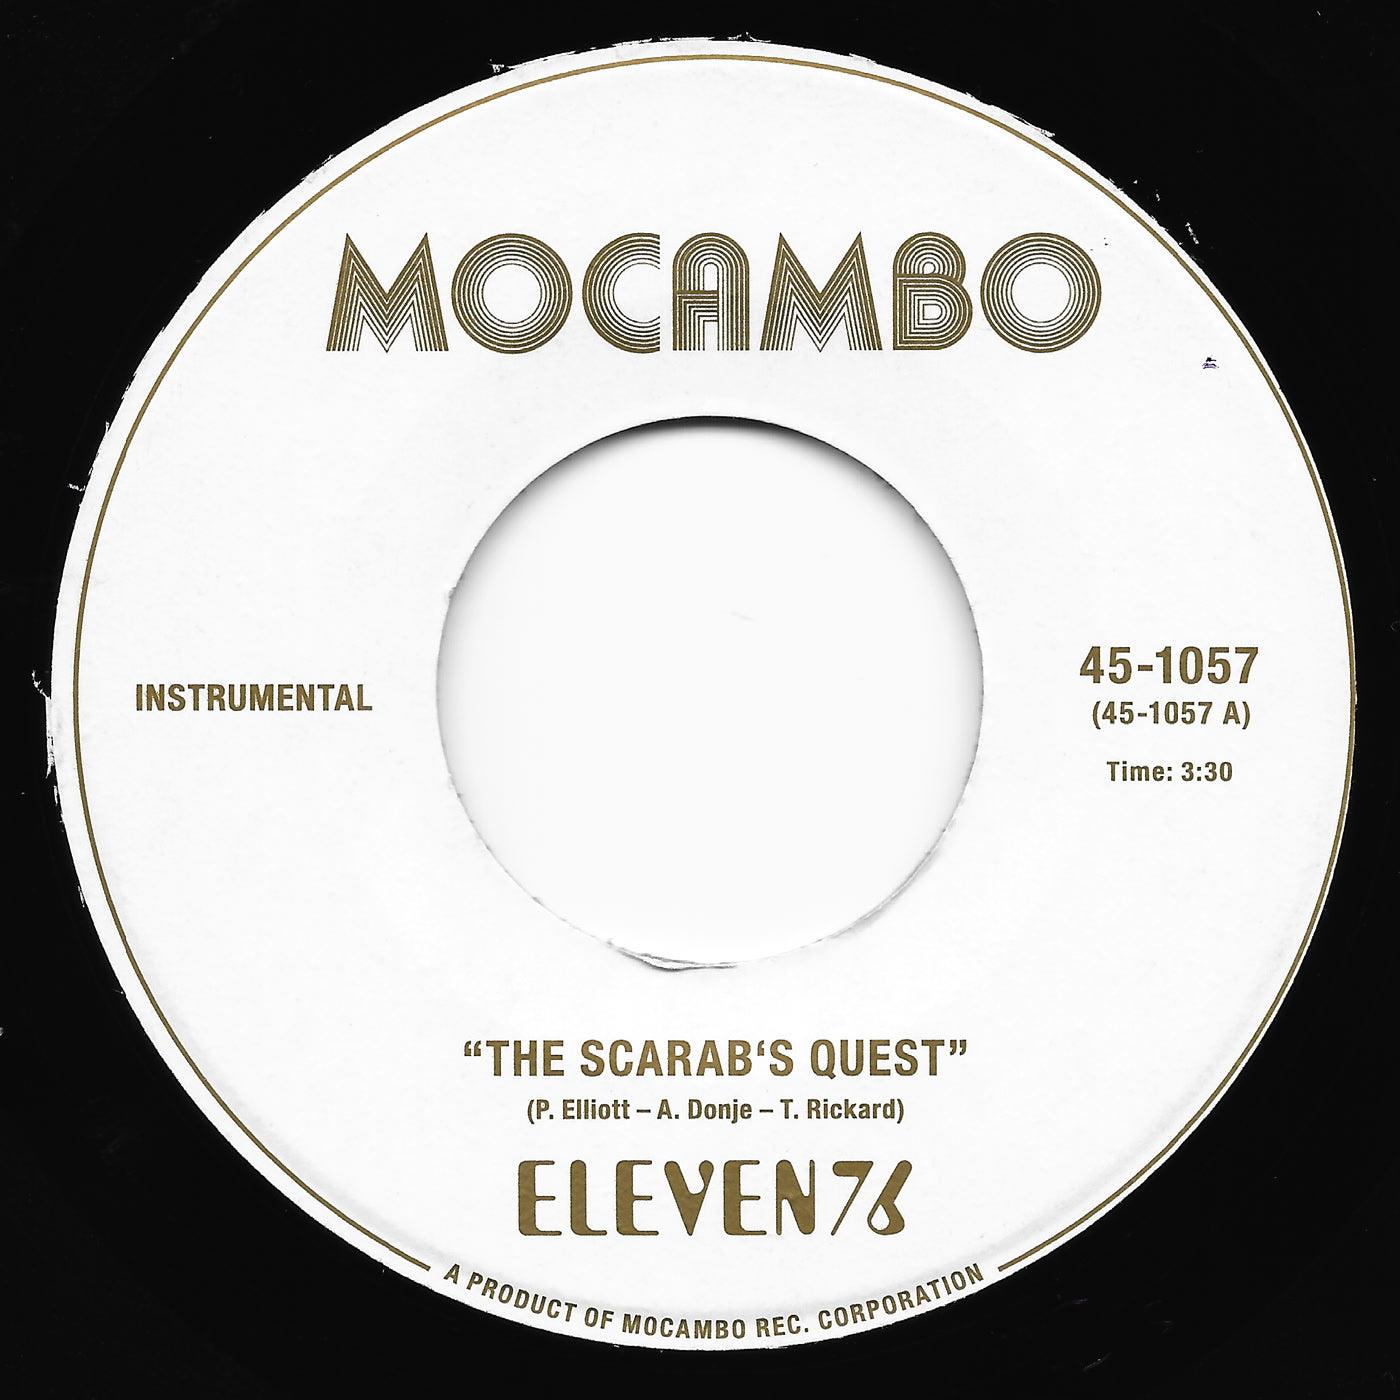 The Scarab's Quest: Eleven76 - Suit Yourself Music